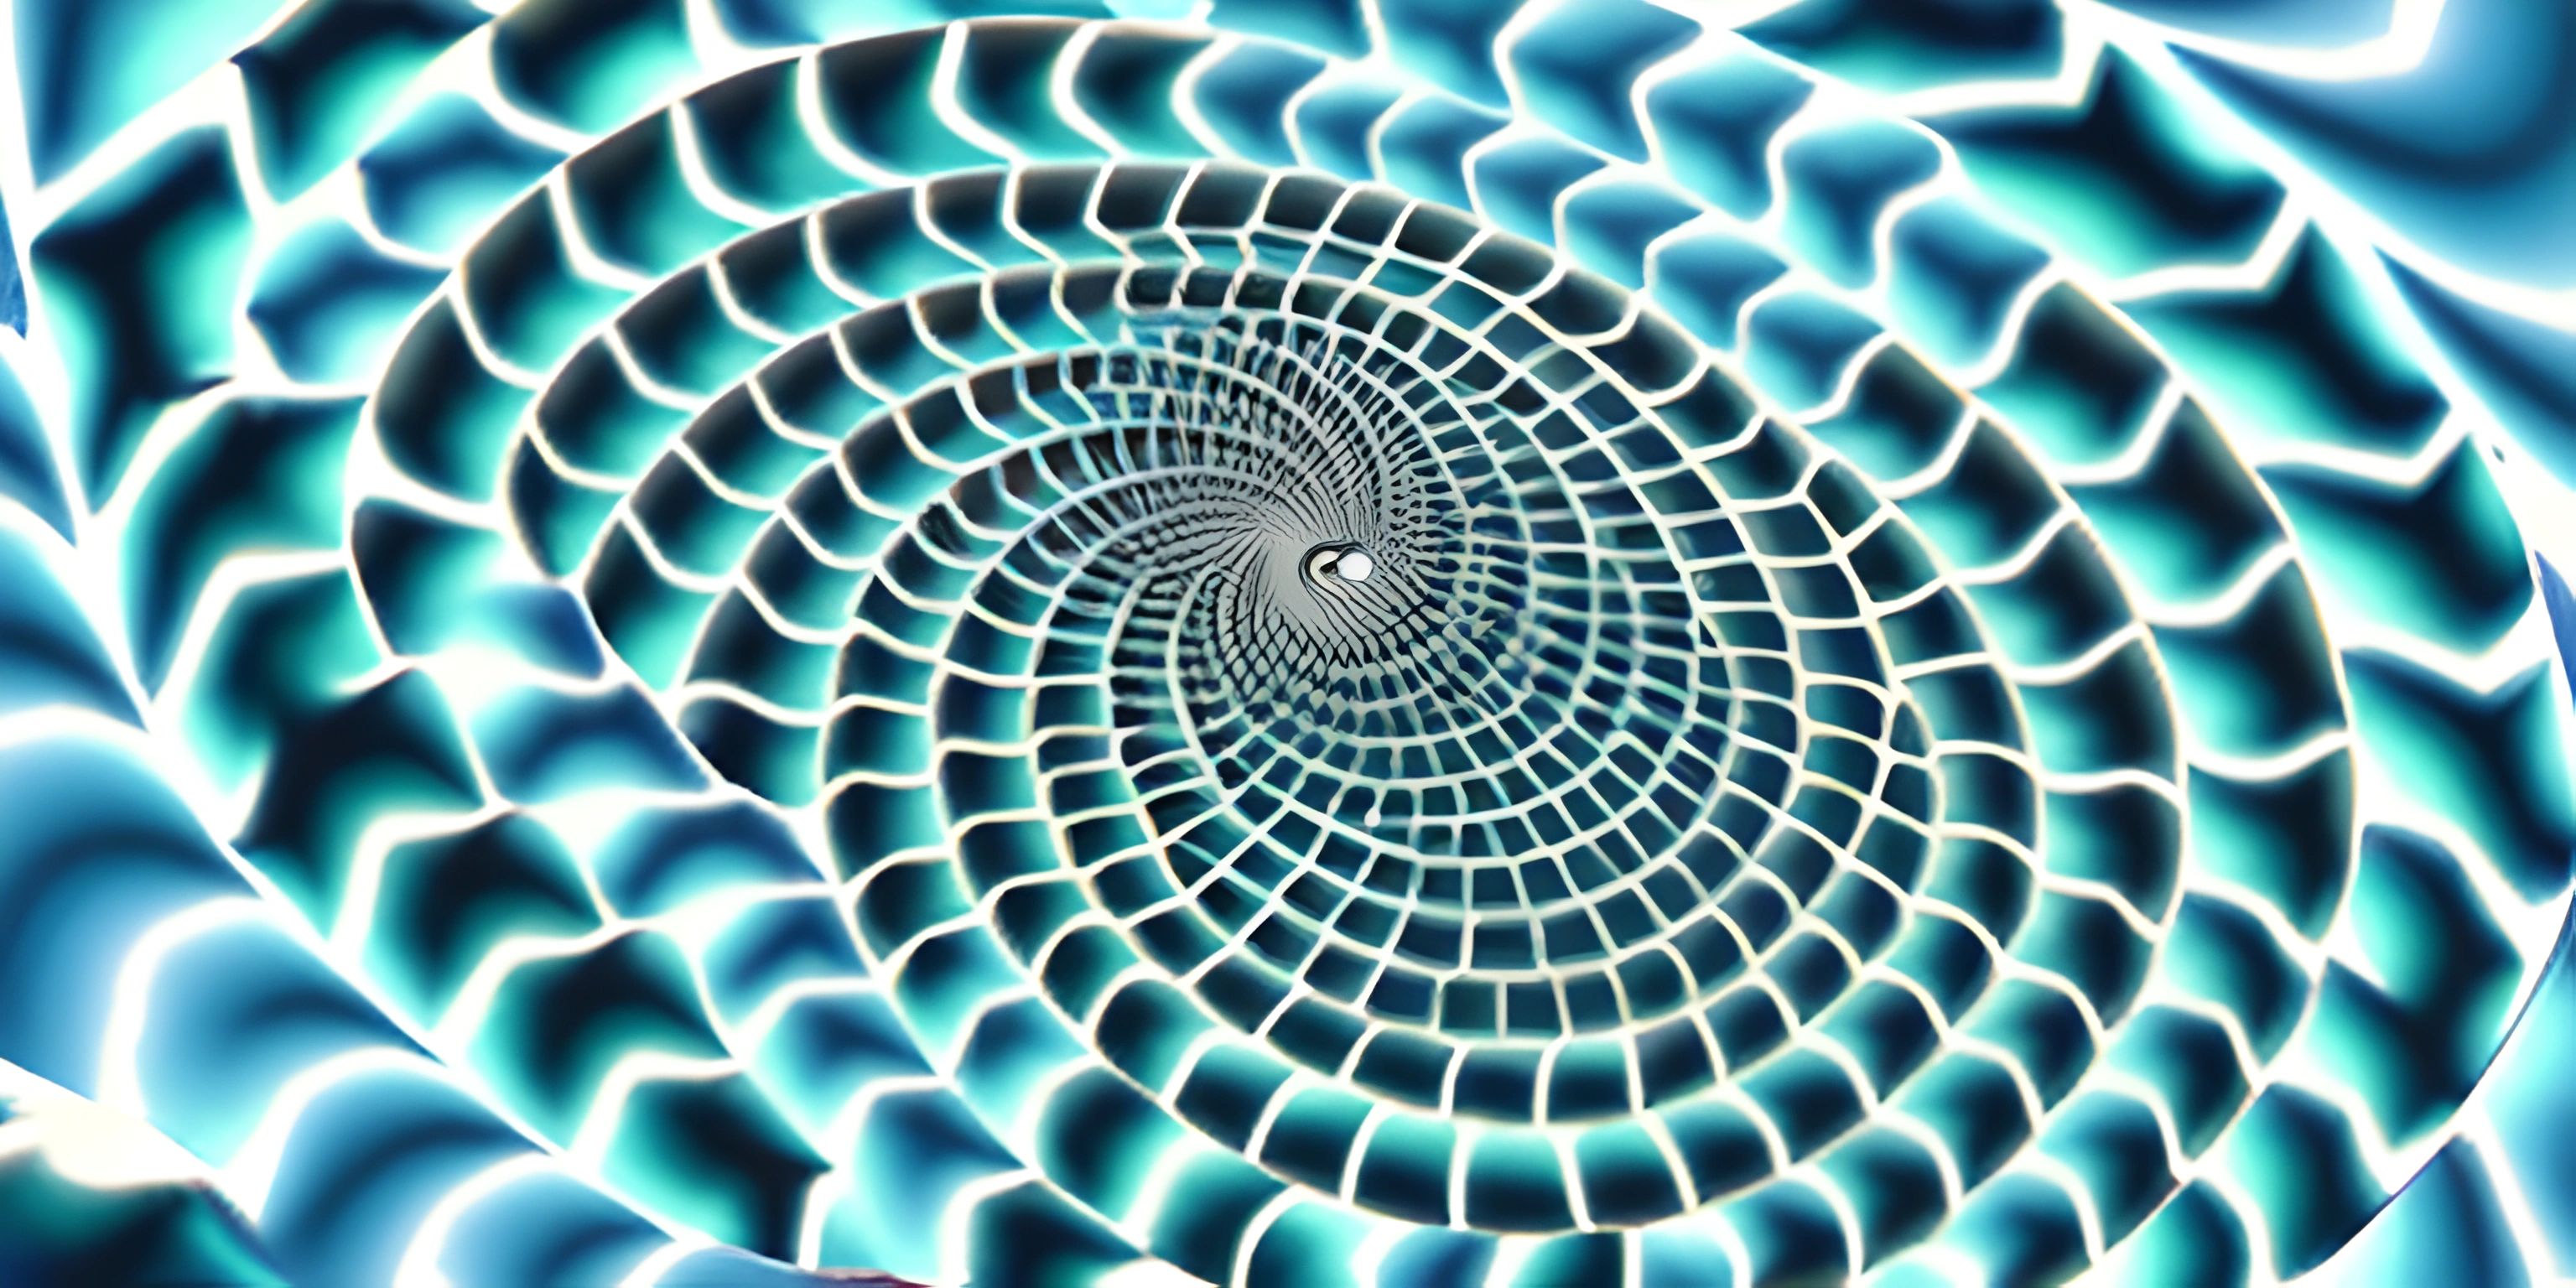 this is an abstract photograph of a blue spiral design with white lines inside it and the center